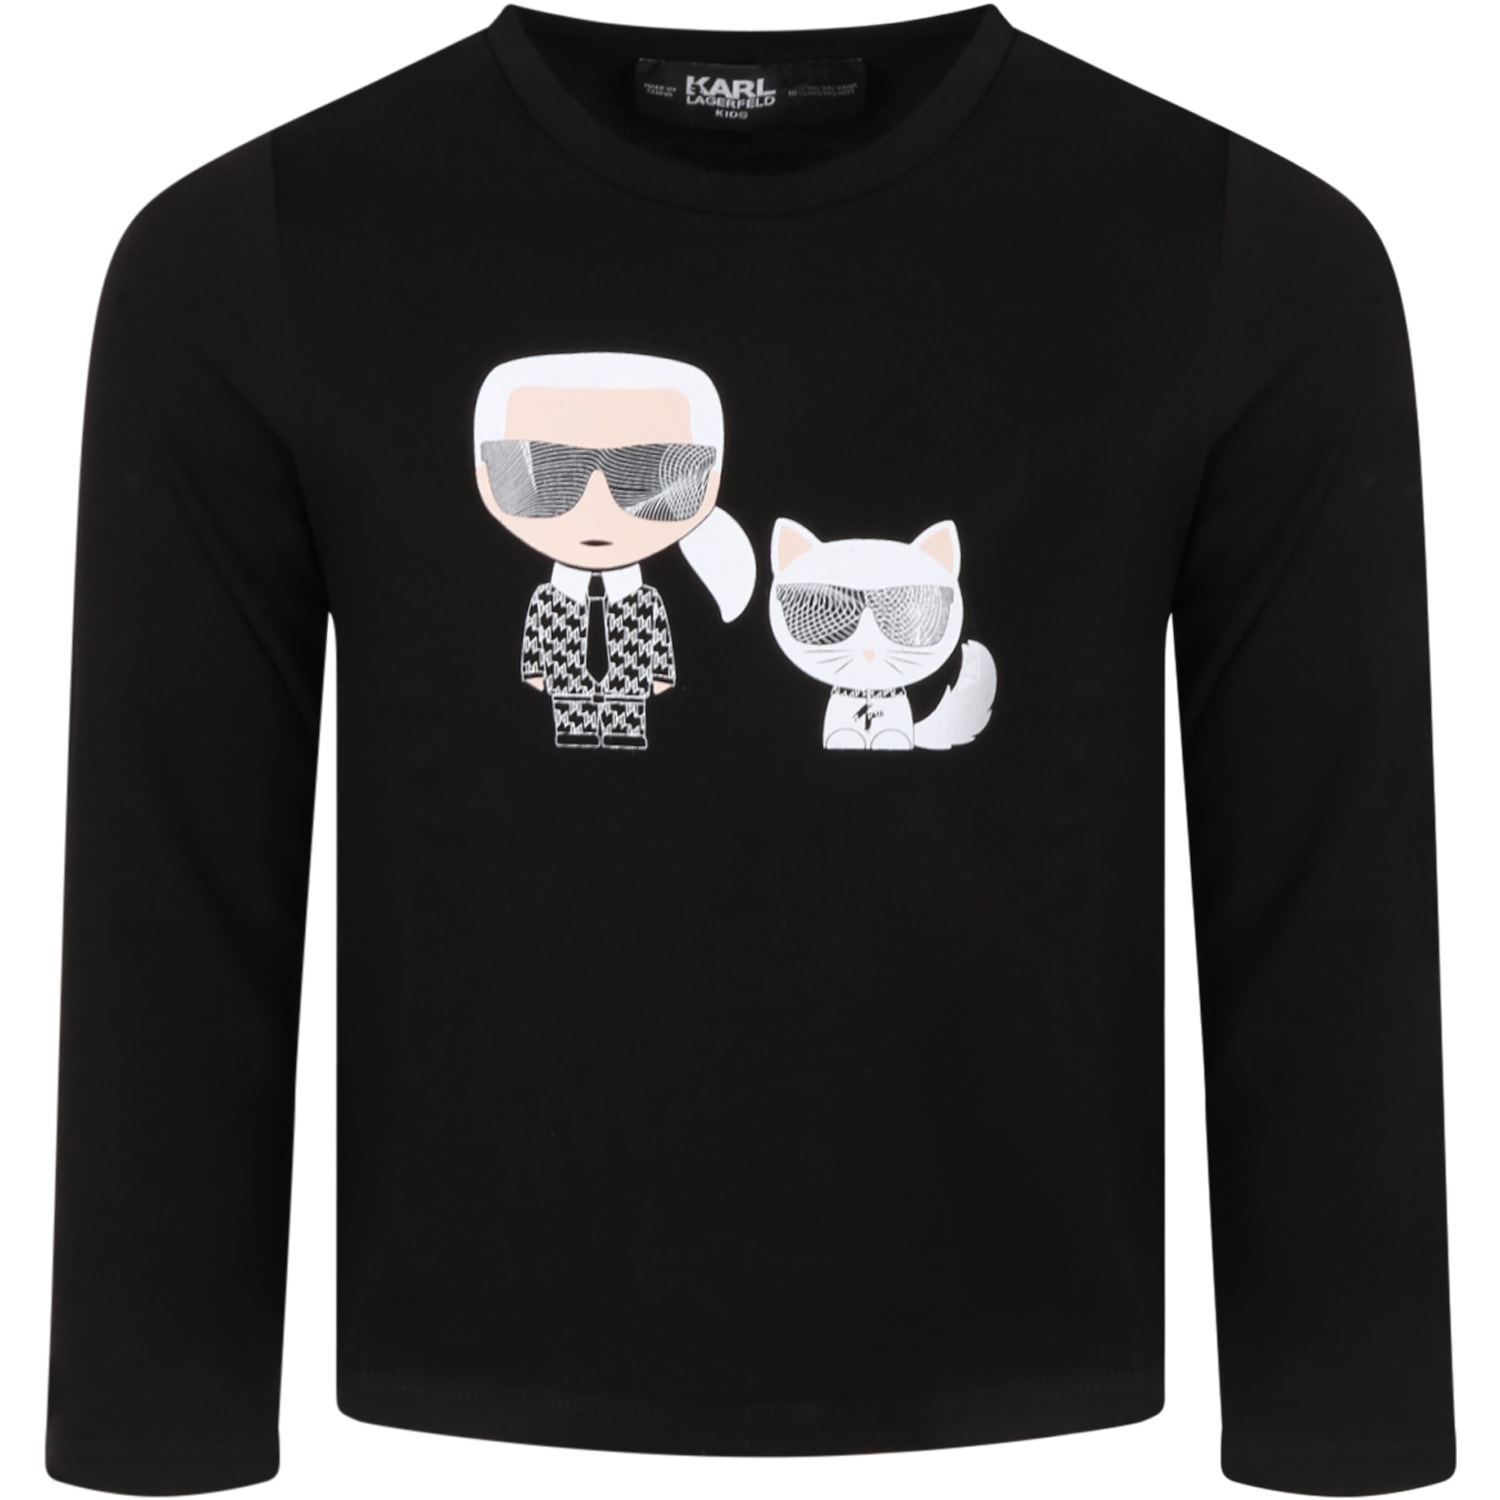 Karl Lagerfeld Black T-shirt For Kids With Karl